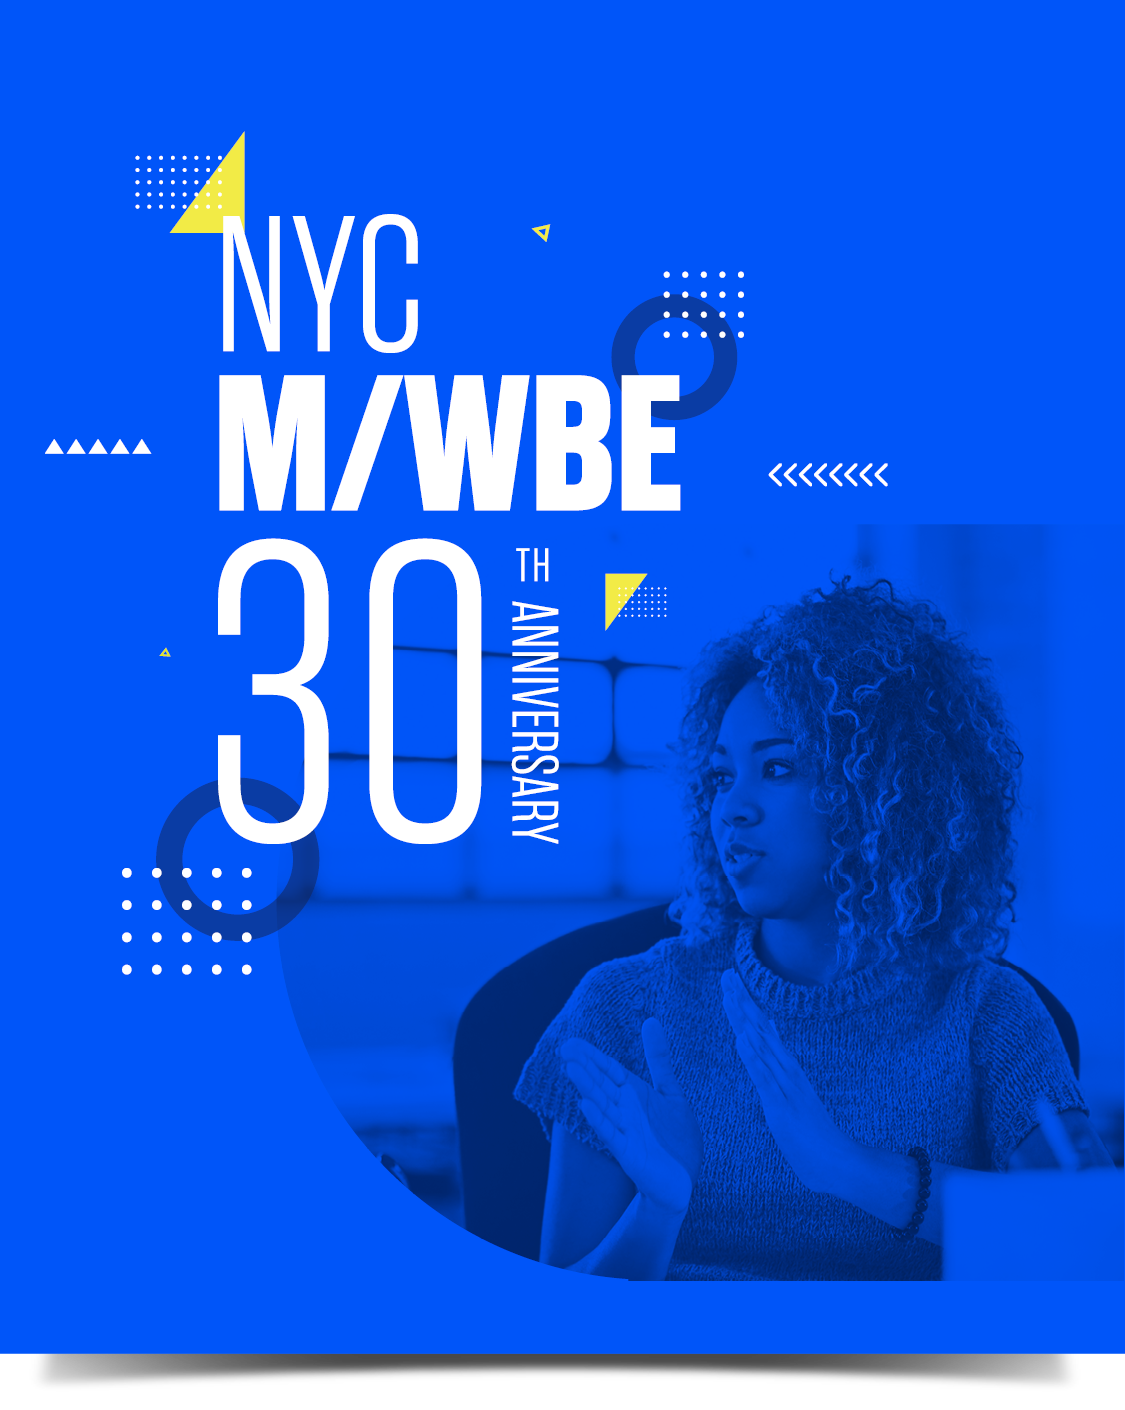 Graphic illustrations with text NYC MWBE 30th Anniversary and image of a woman talking to someone to her right